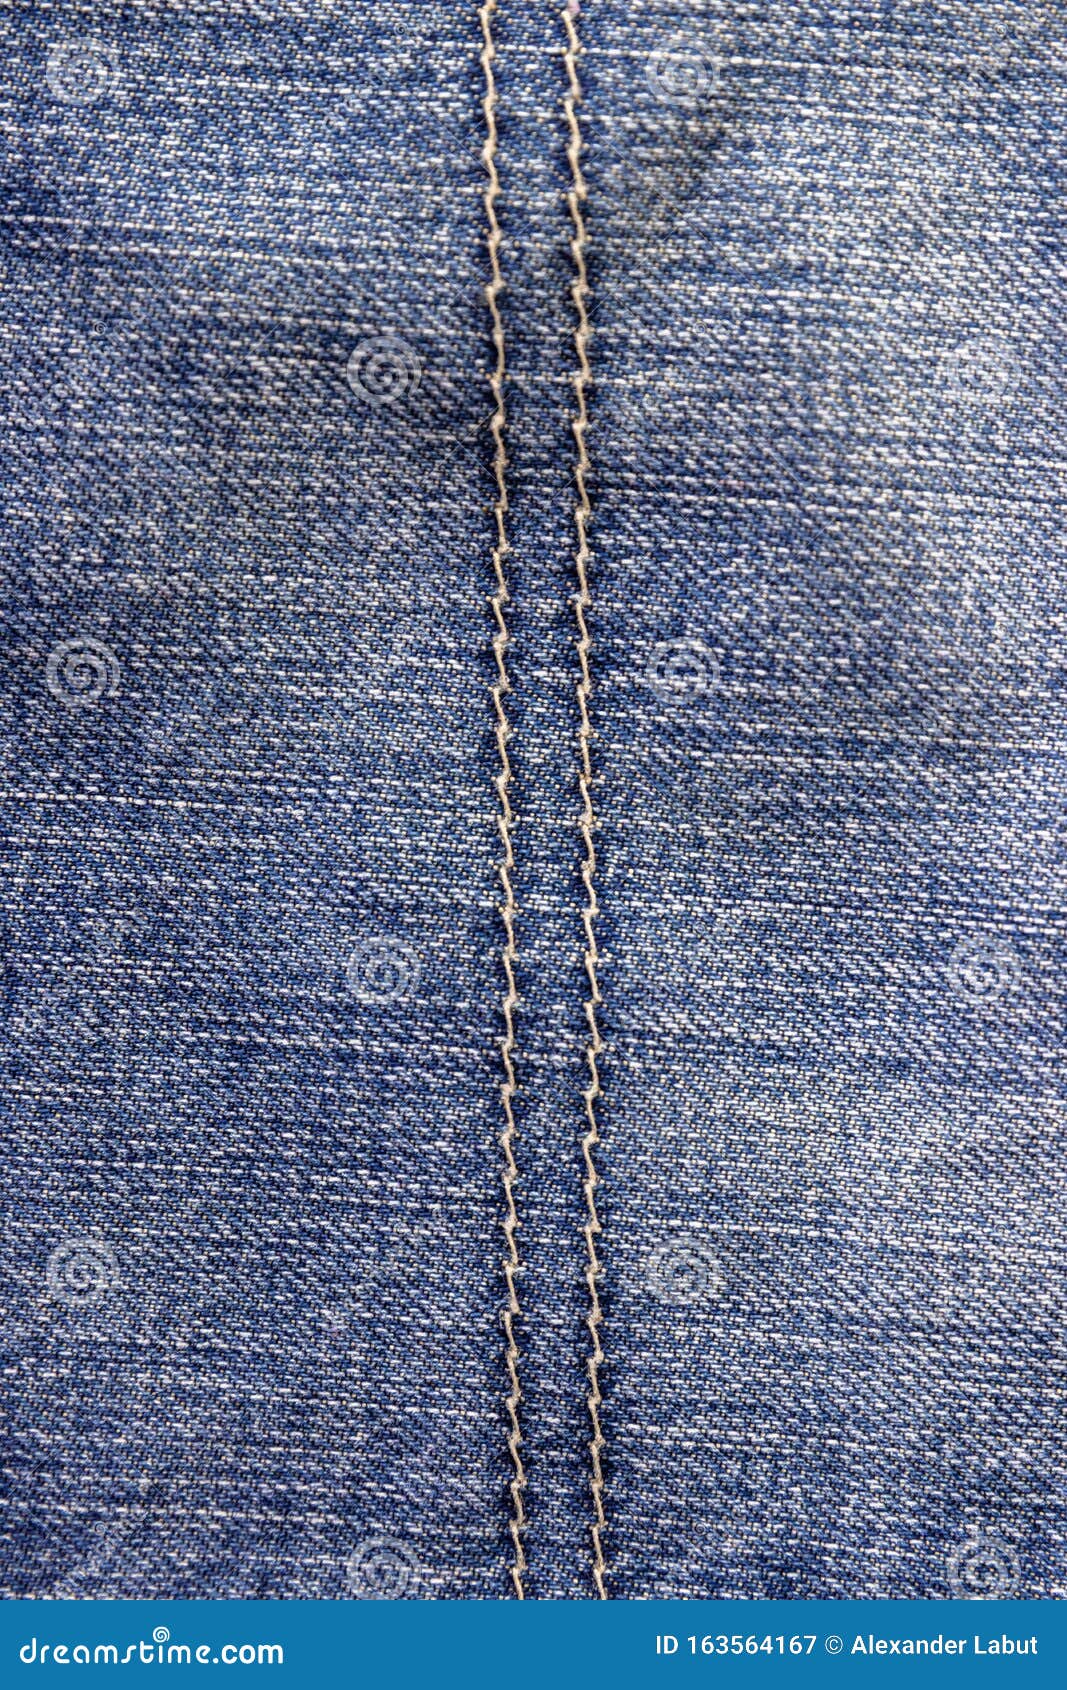 Top View of Denim Jeans Texture with Stitch. Canvas Jeans Background of ...